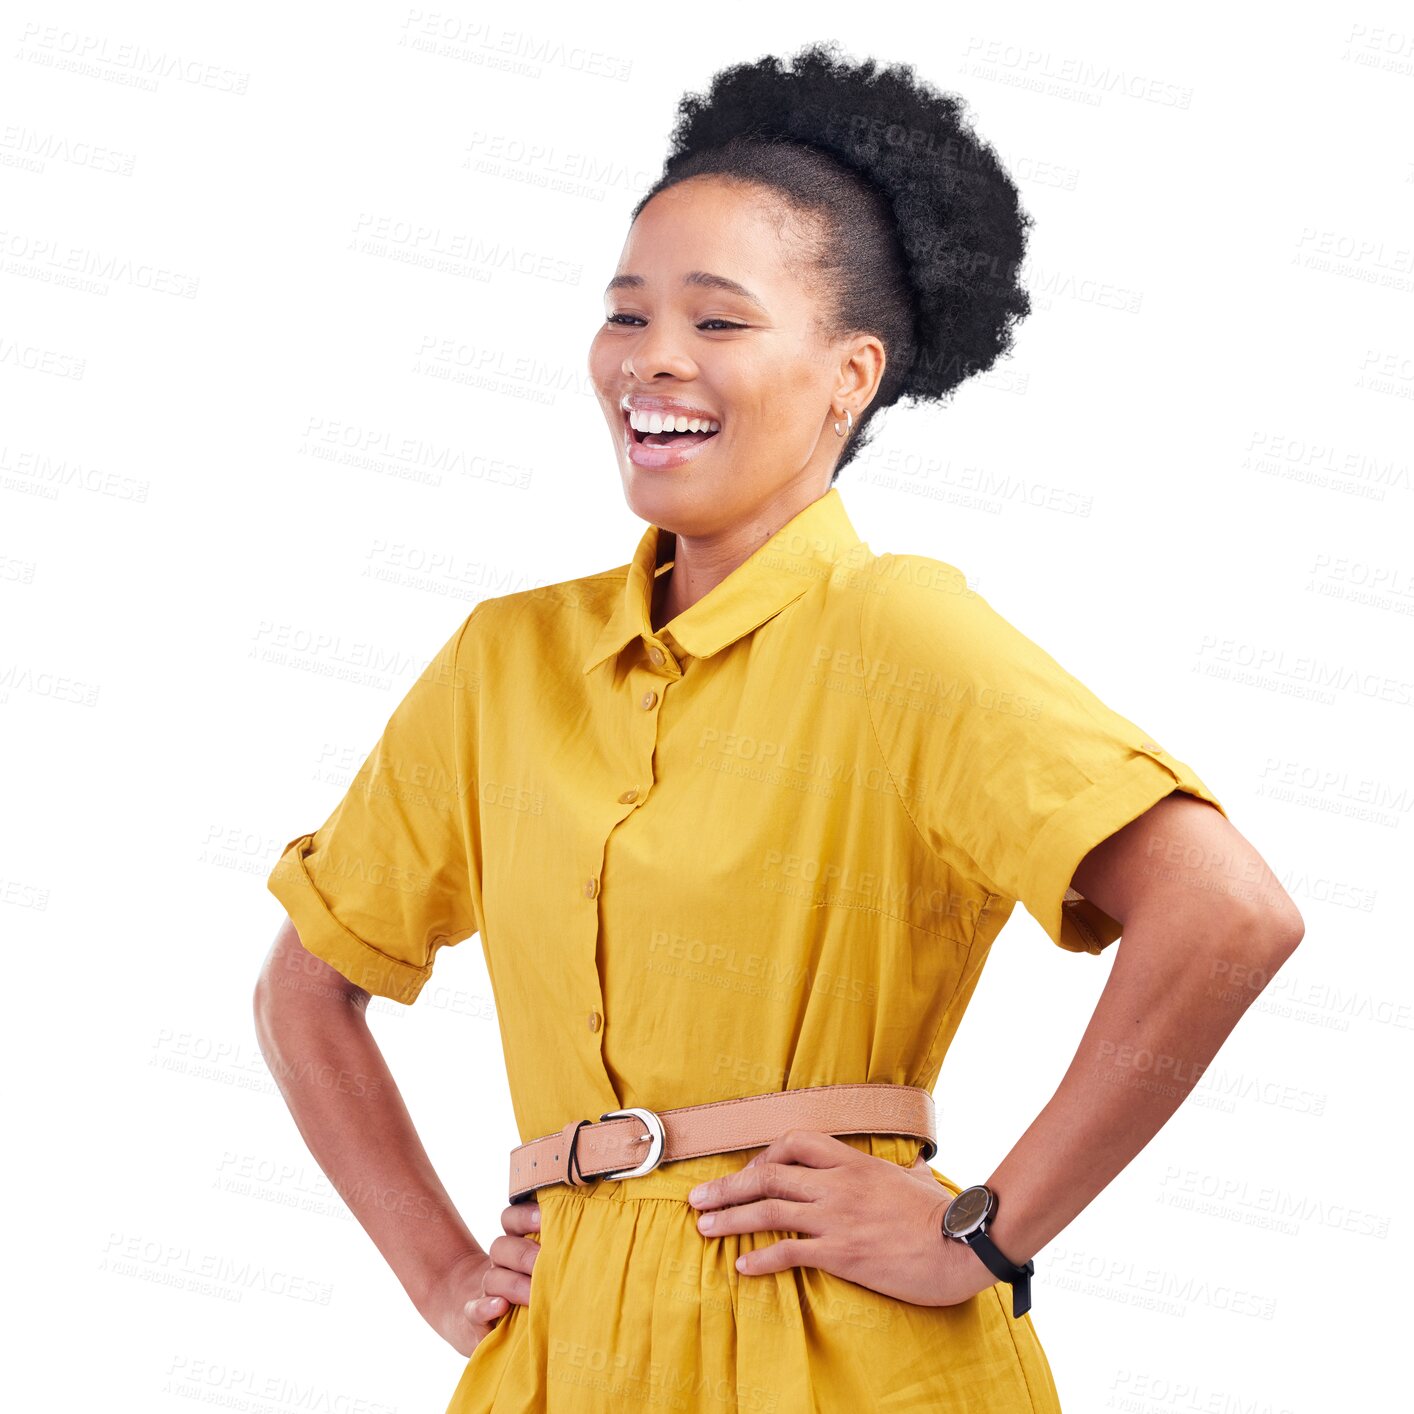 Buy stock photo Funny, laughing and black woman with happiness, joy and positive mindset isolated on a transparent background. African person, girl and model with fashion, stylish outfit and hands on hips with png